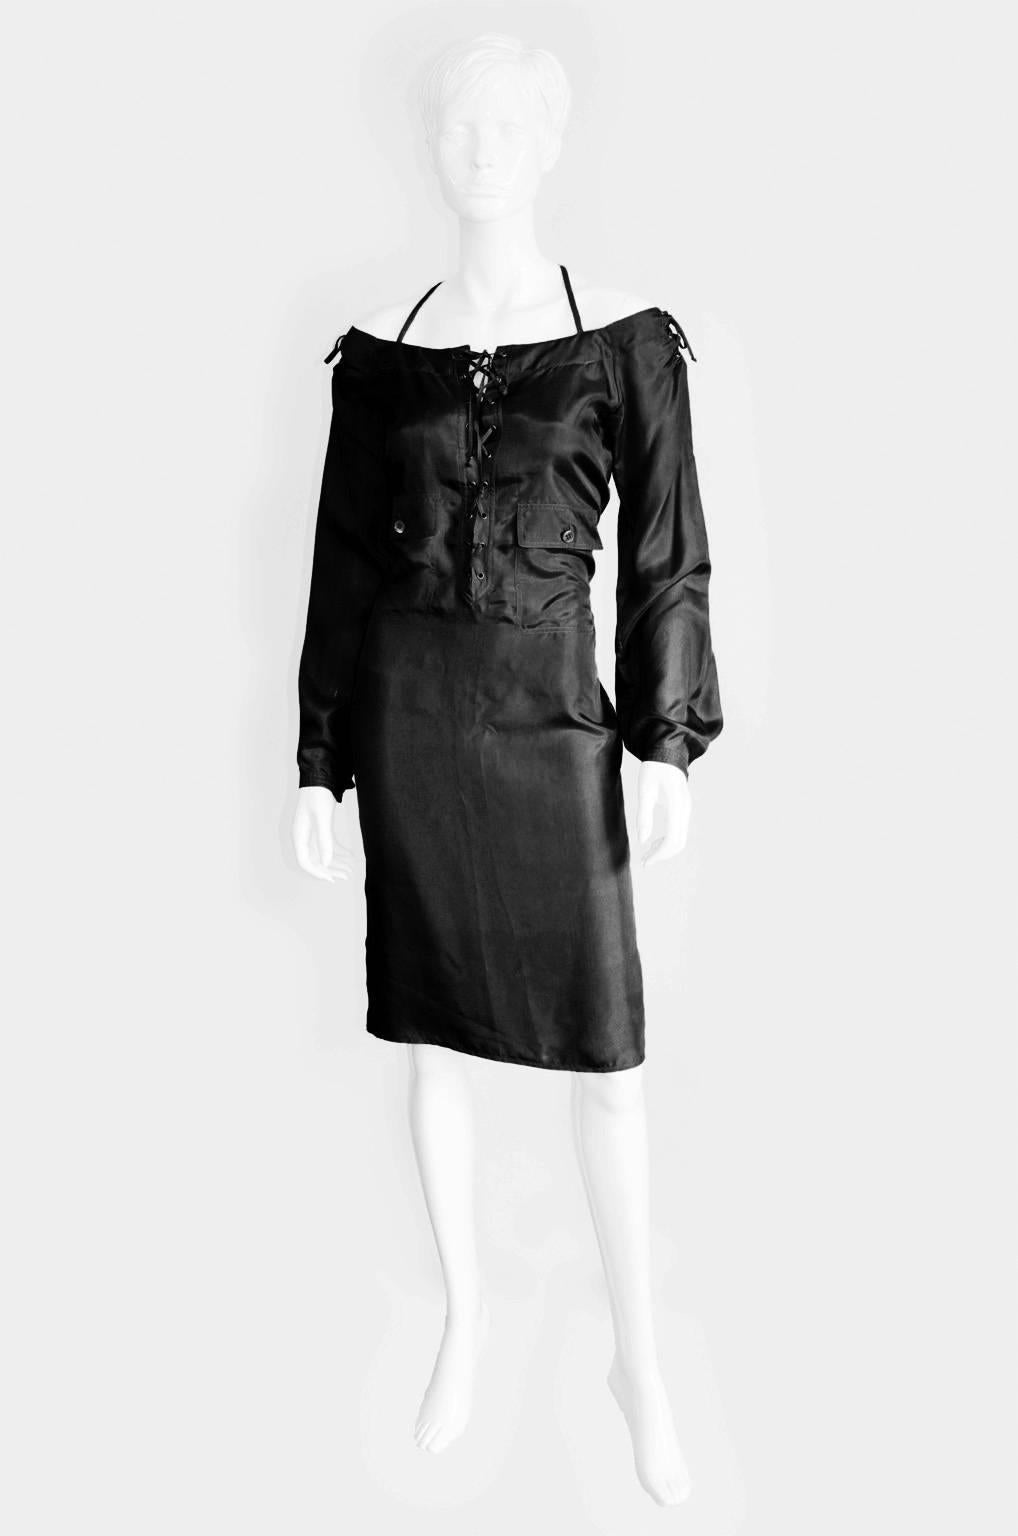 Heavenly Black Silk Tom Ford For YSL Rive Gauche Spring Summer 2002 Safari Collection Dress!

Exquisite silk knee-length dress from Tom Ford's acclaimed Spring/Summer 2002 Safari/Mombasa Collection for YSL Rive Gauche. This very special piece is